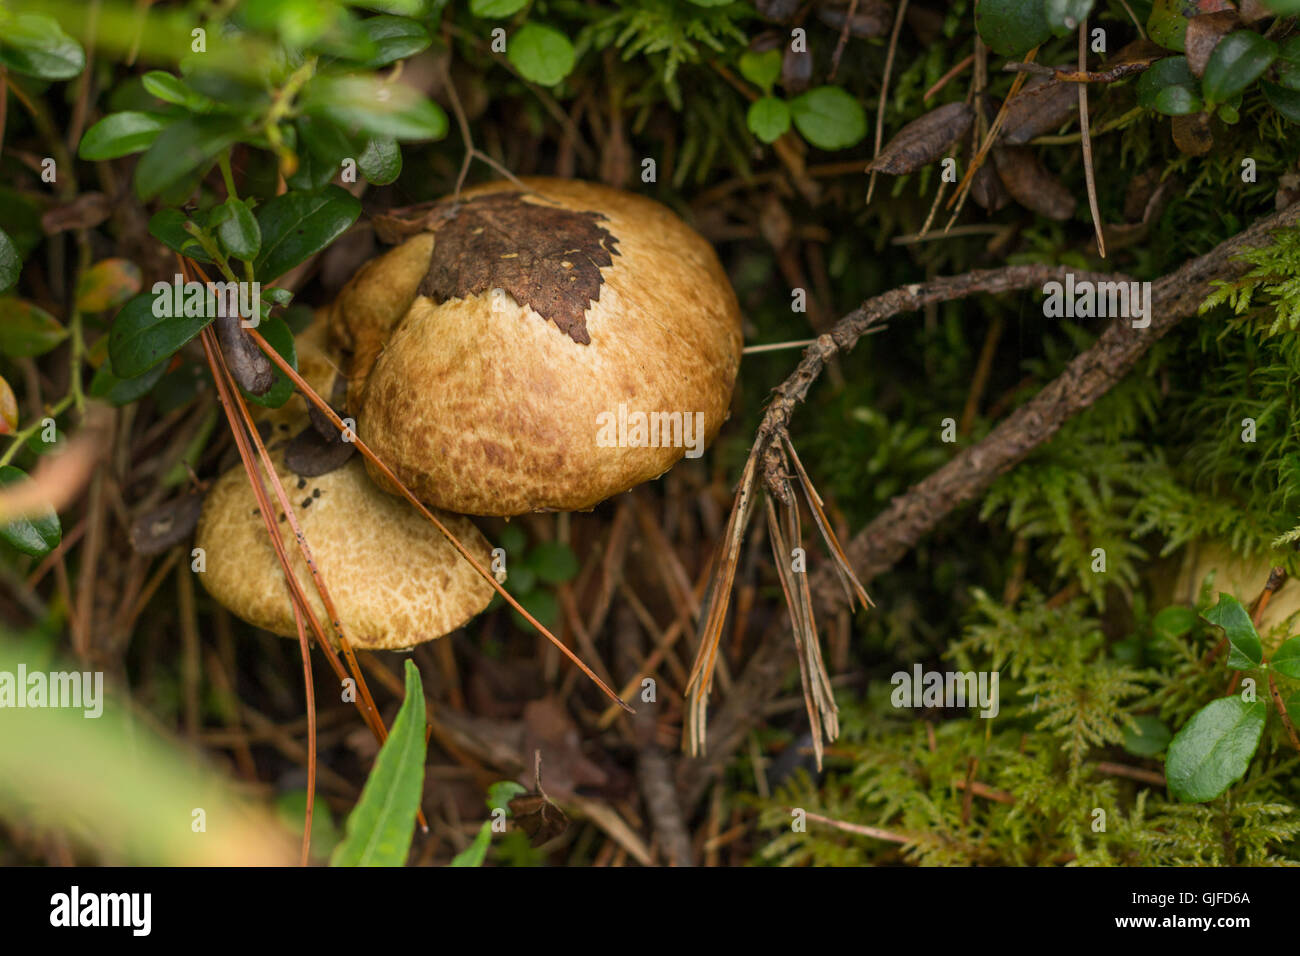 russula, mushroom with a yellow hat in the grass with leaf Stock Photo